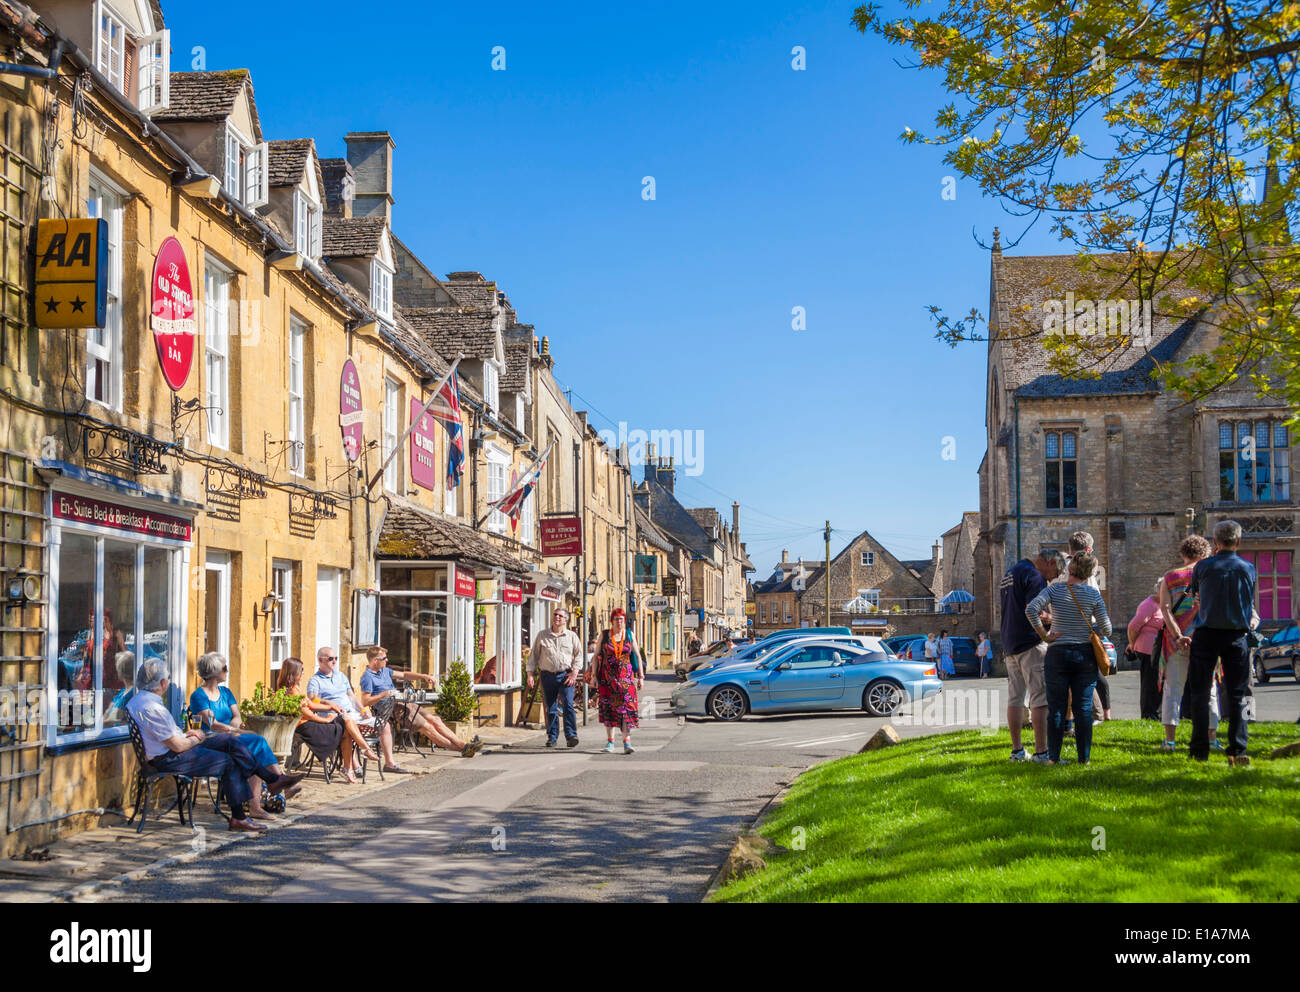 Cotswolds Village di Stow on the Wold Old Stocks Hotel in the Market Square, Stow on the Wold, Cotswolds, Gloucesterstershire, Inghilterra, Regno Unito, GB, Europa Foto Stock